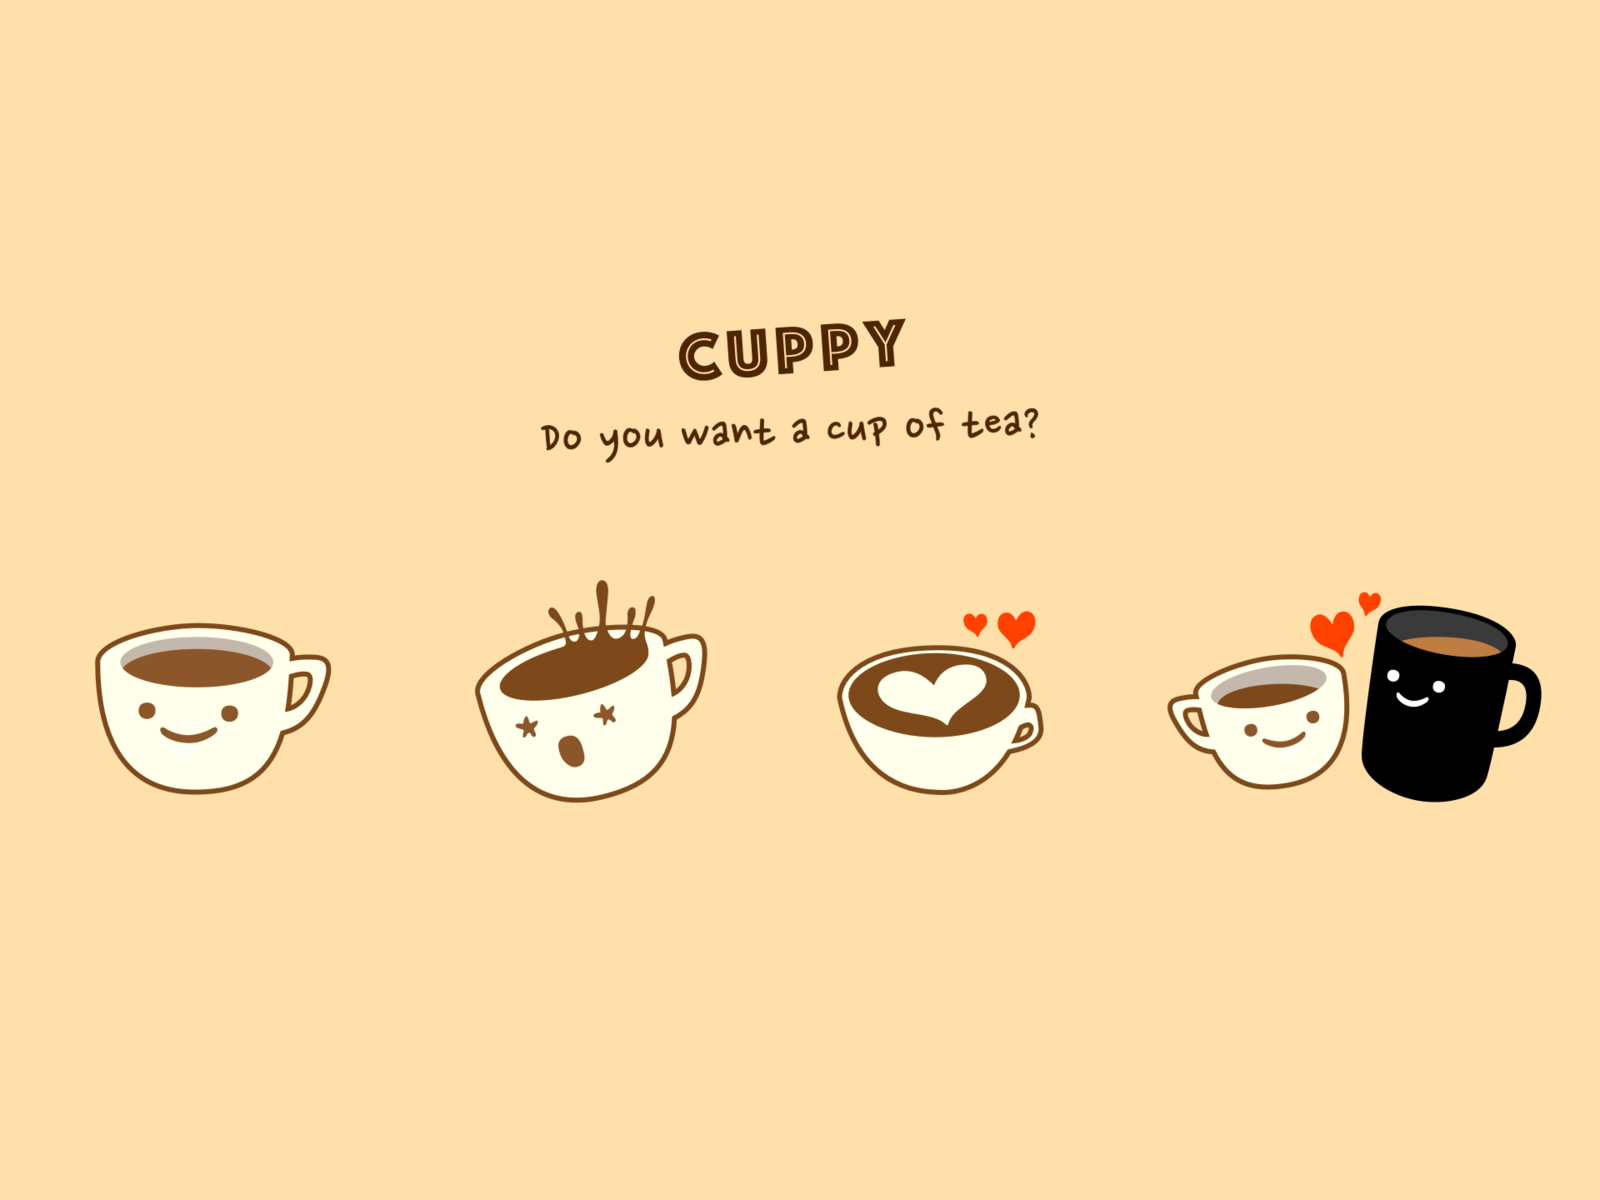 Cuppy. A WhatsApp Sticker. by Minseung Song on Dribbble